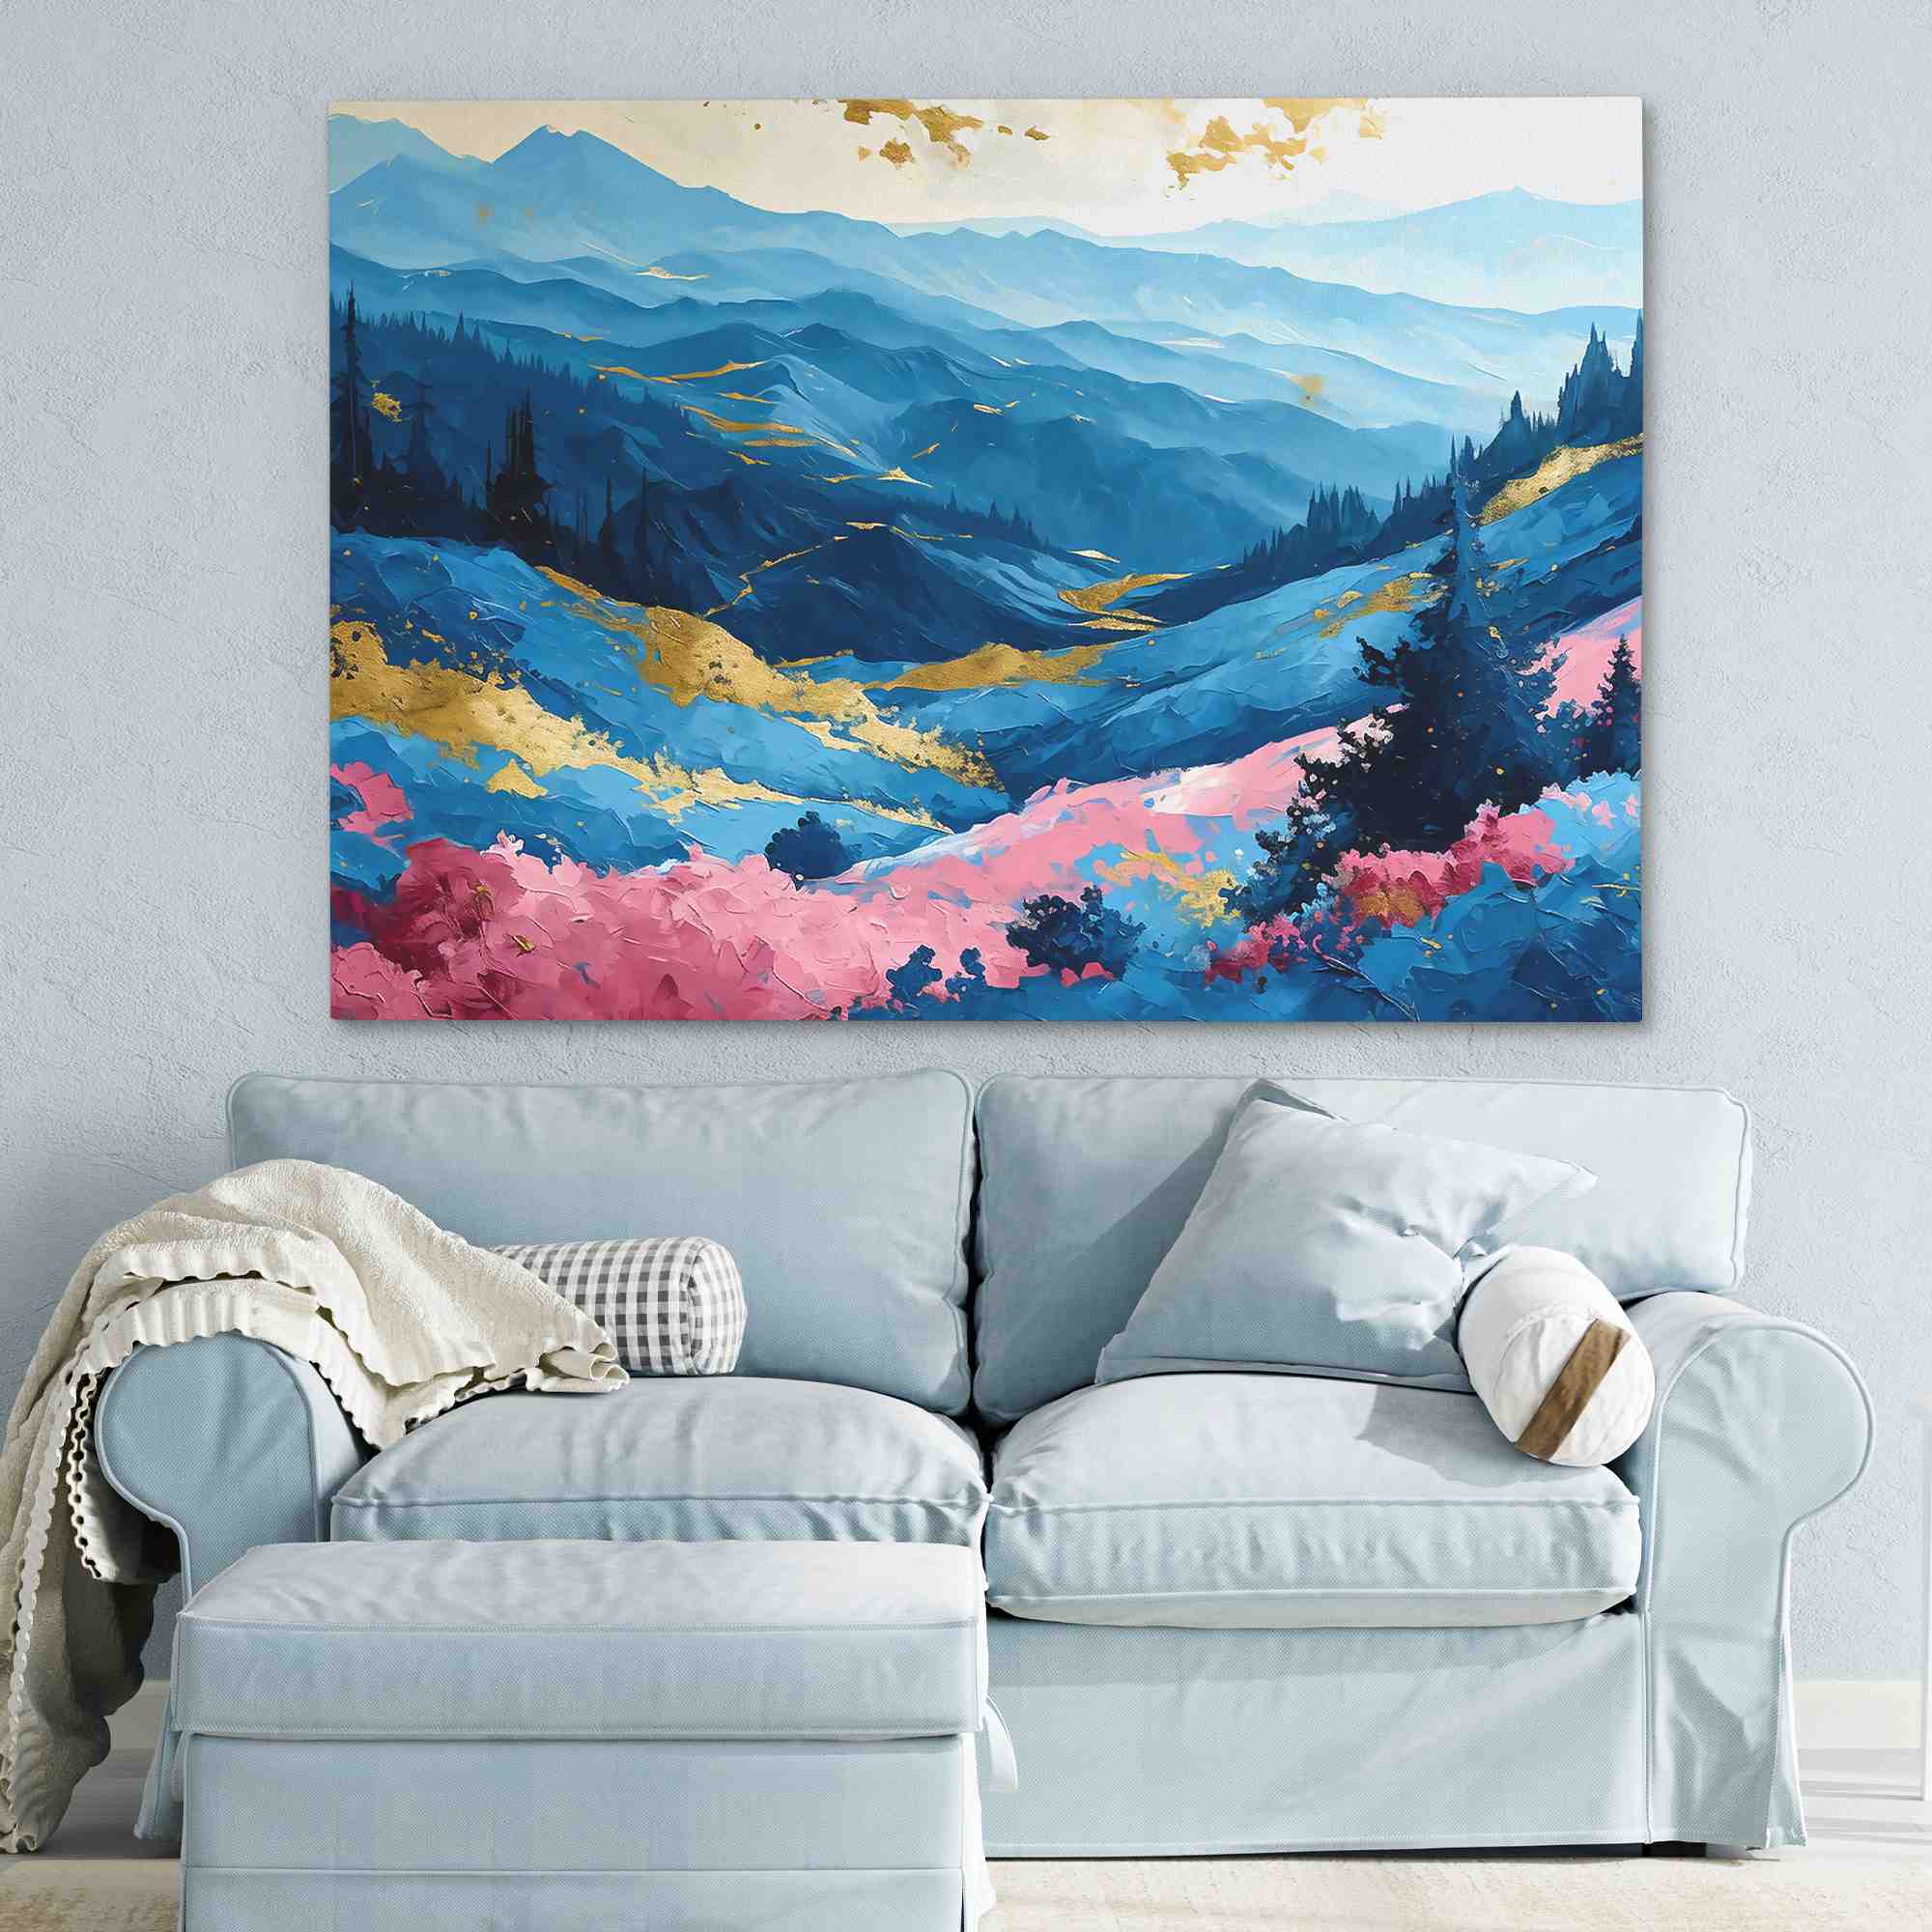 a painting of a mountain landscape with blue and pink colors